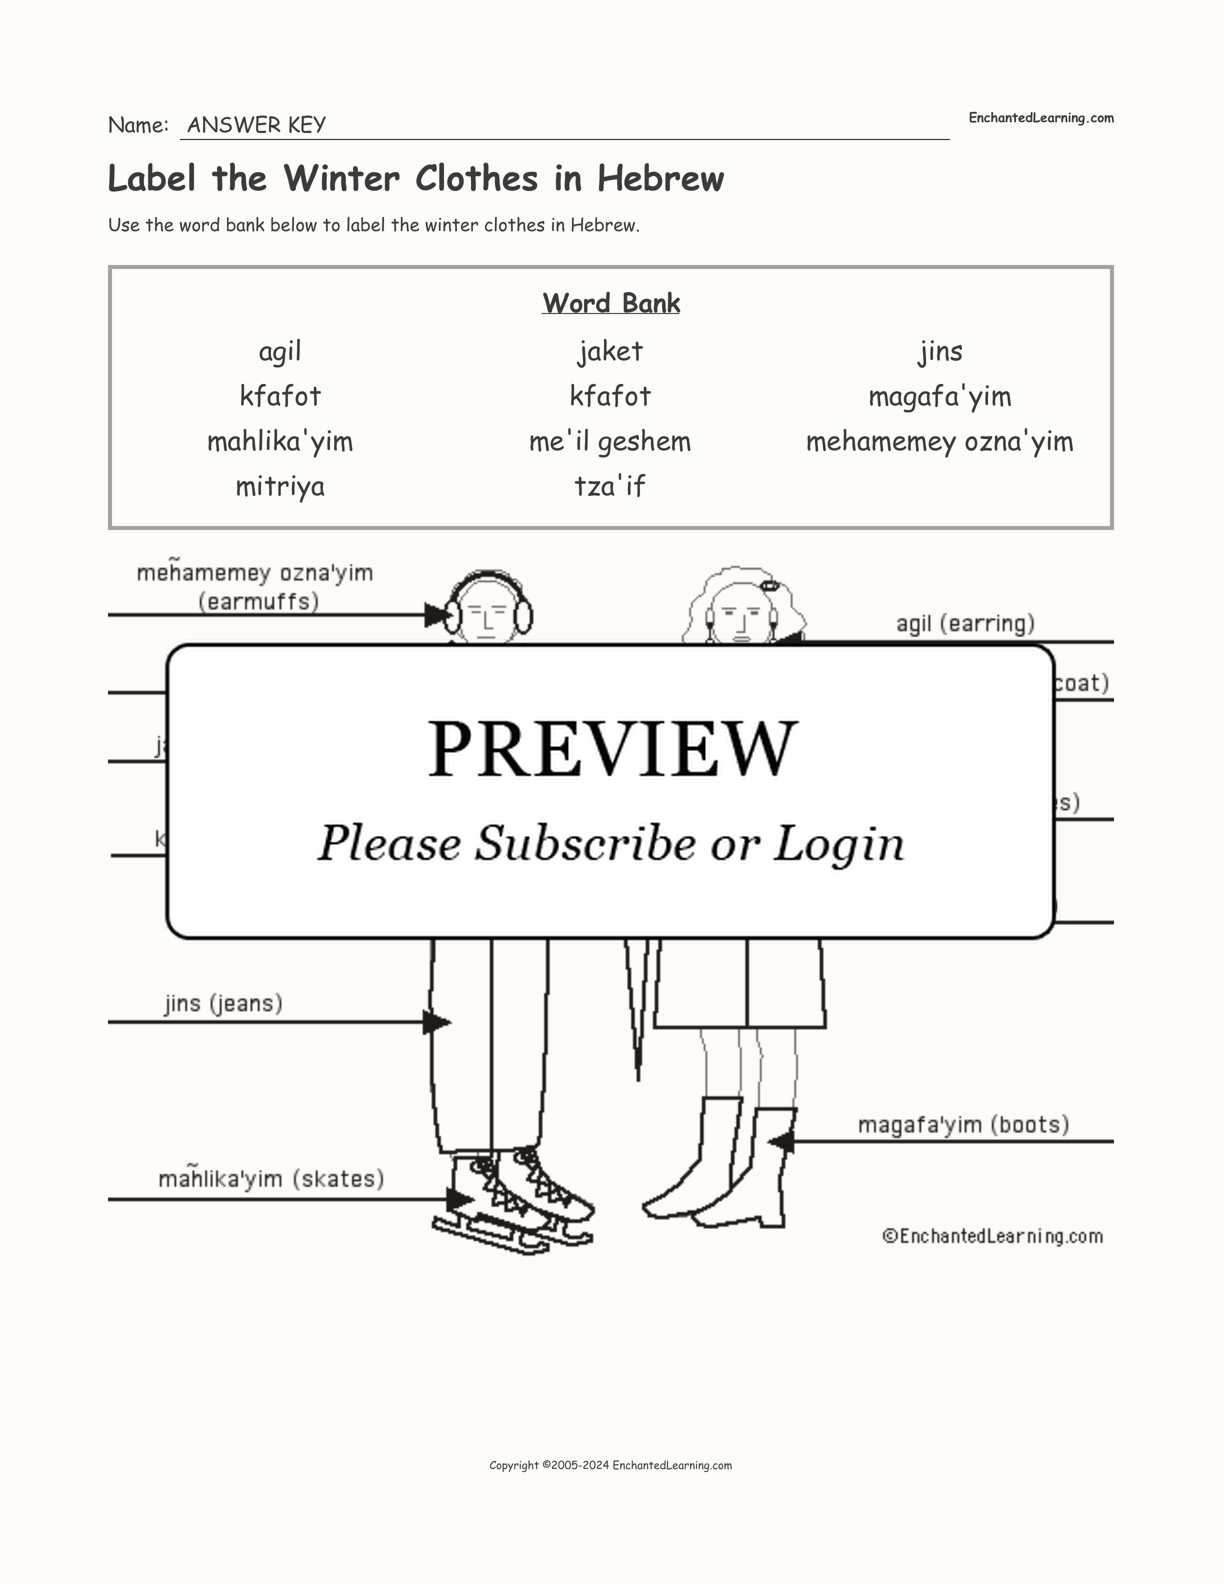 Label the Winter Clothes in Hebrew interactive worksheet page 2